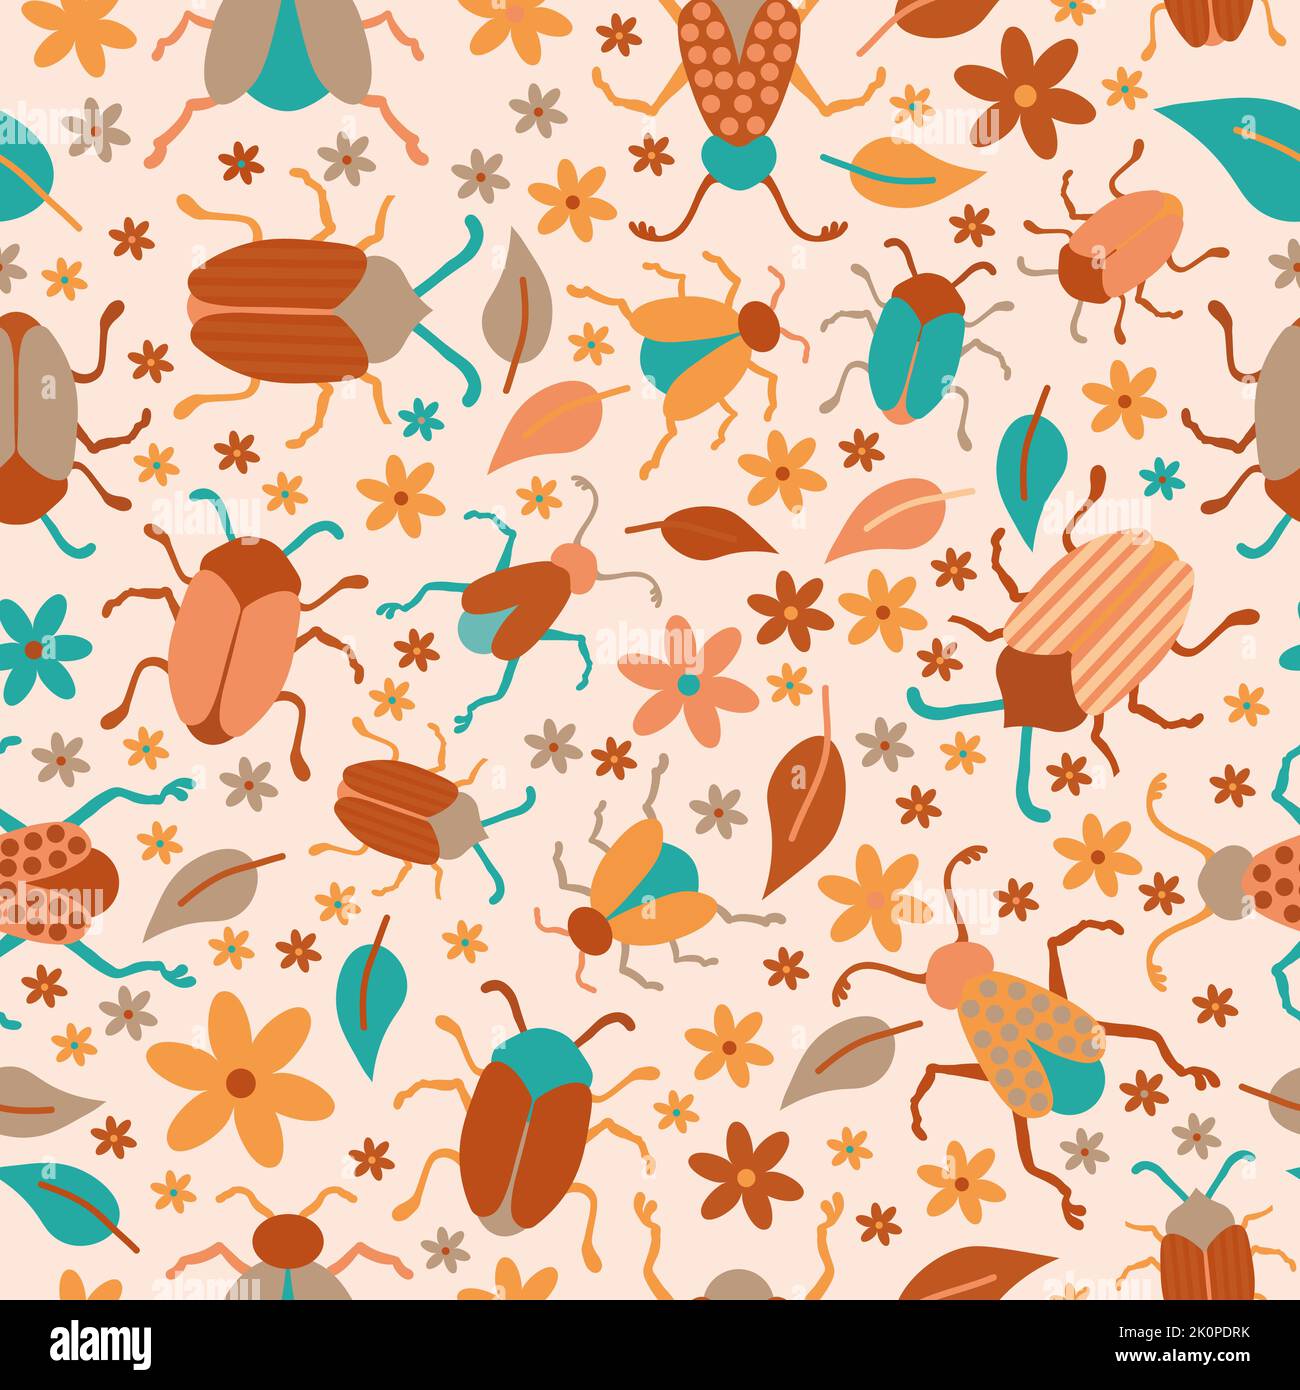 Bugs, leaves and flowers seamless pattern Stock Vector